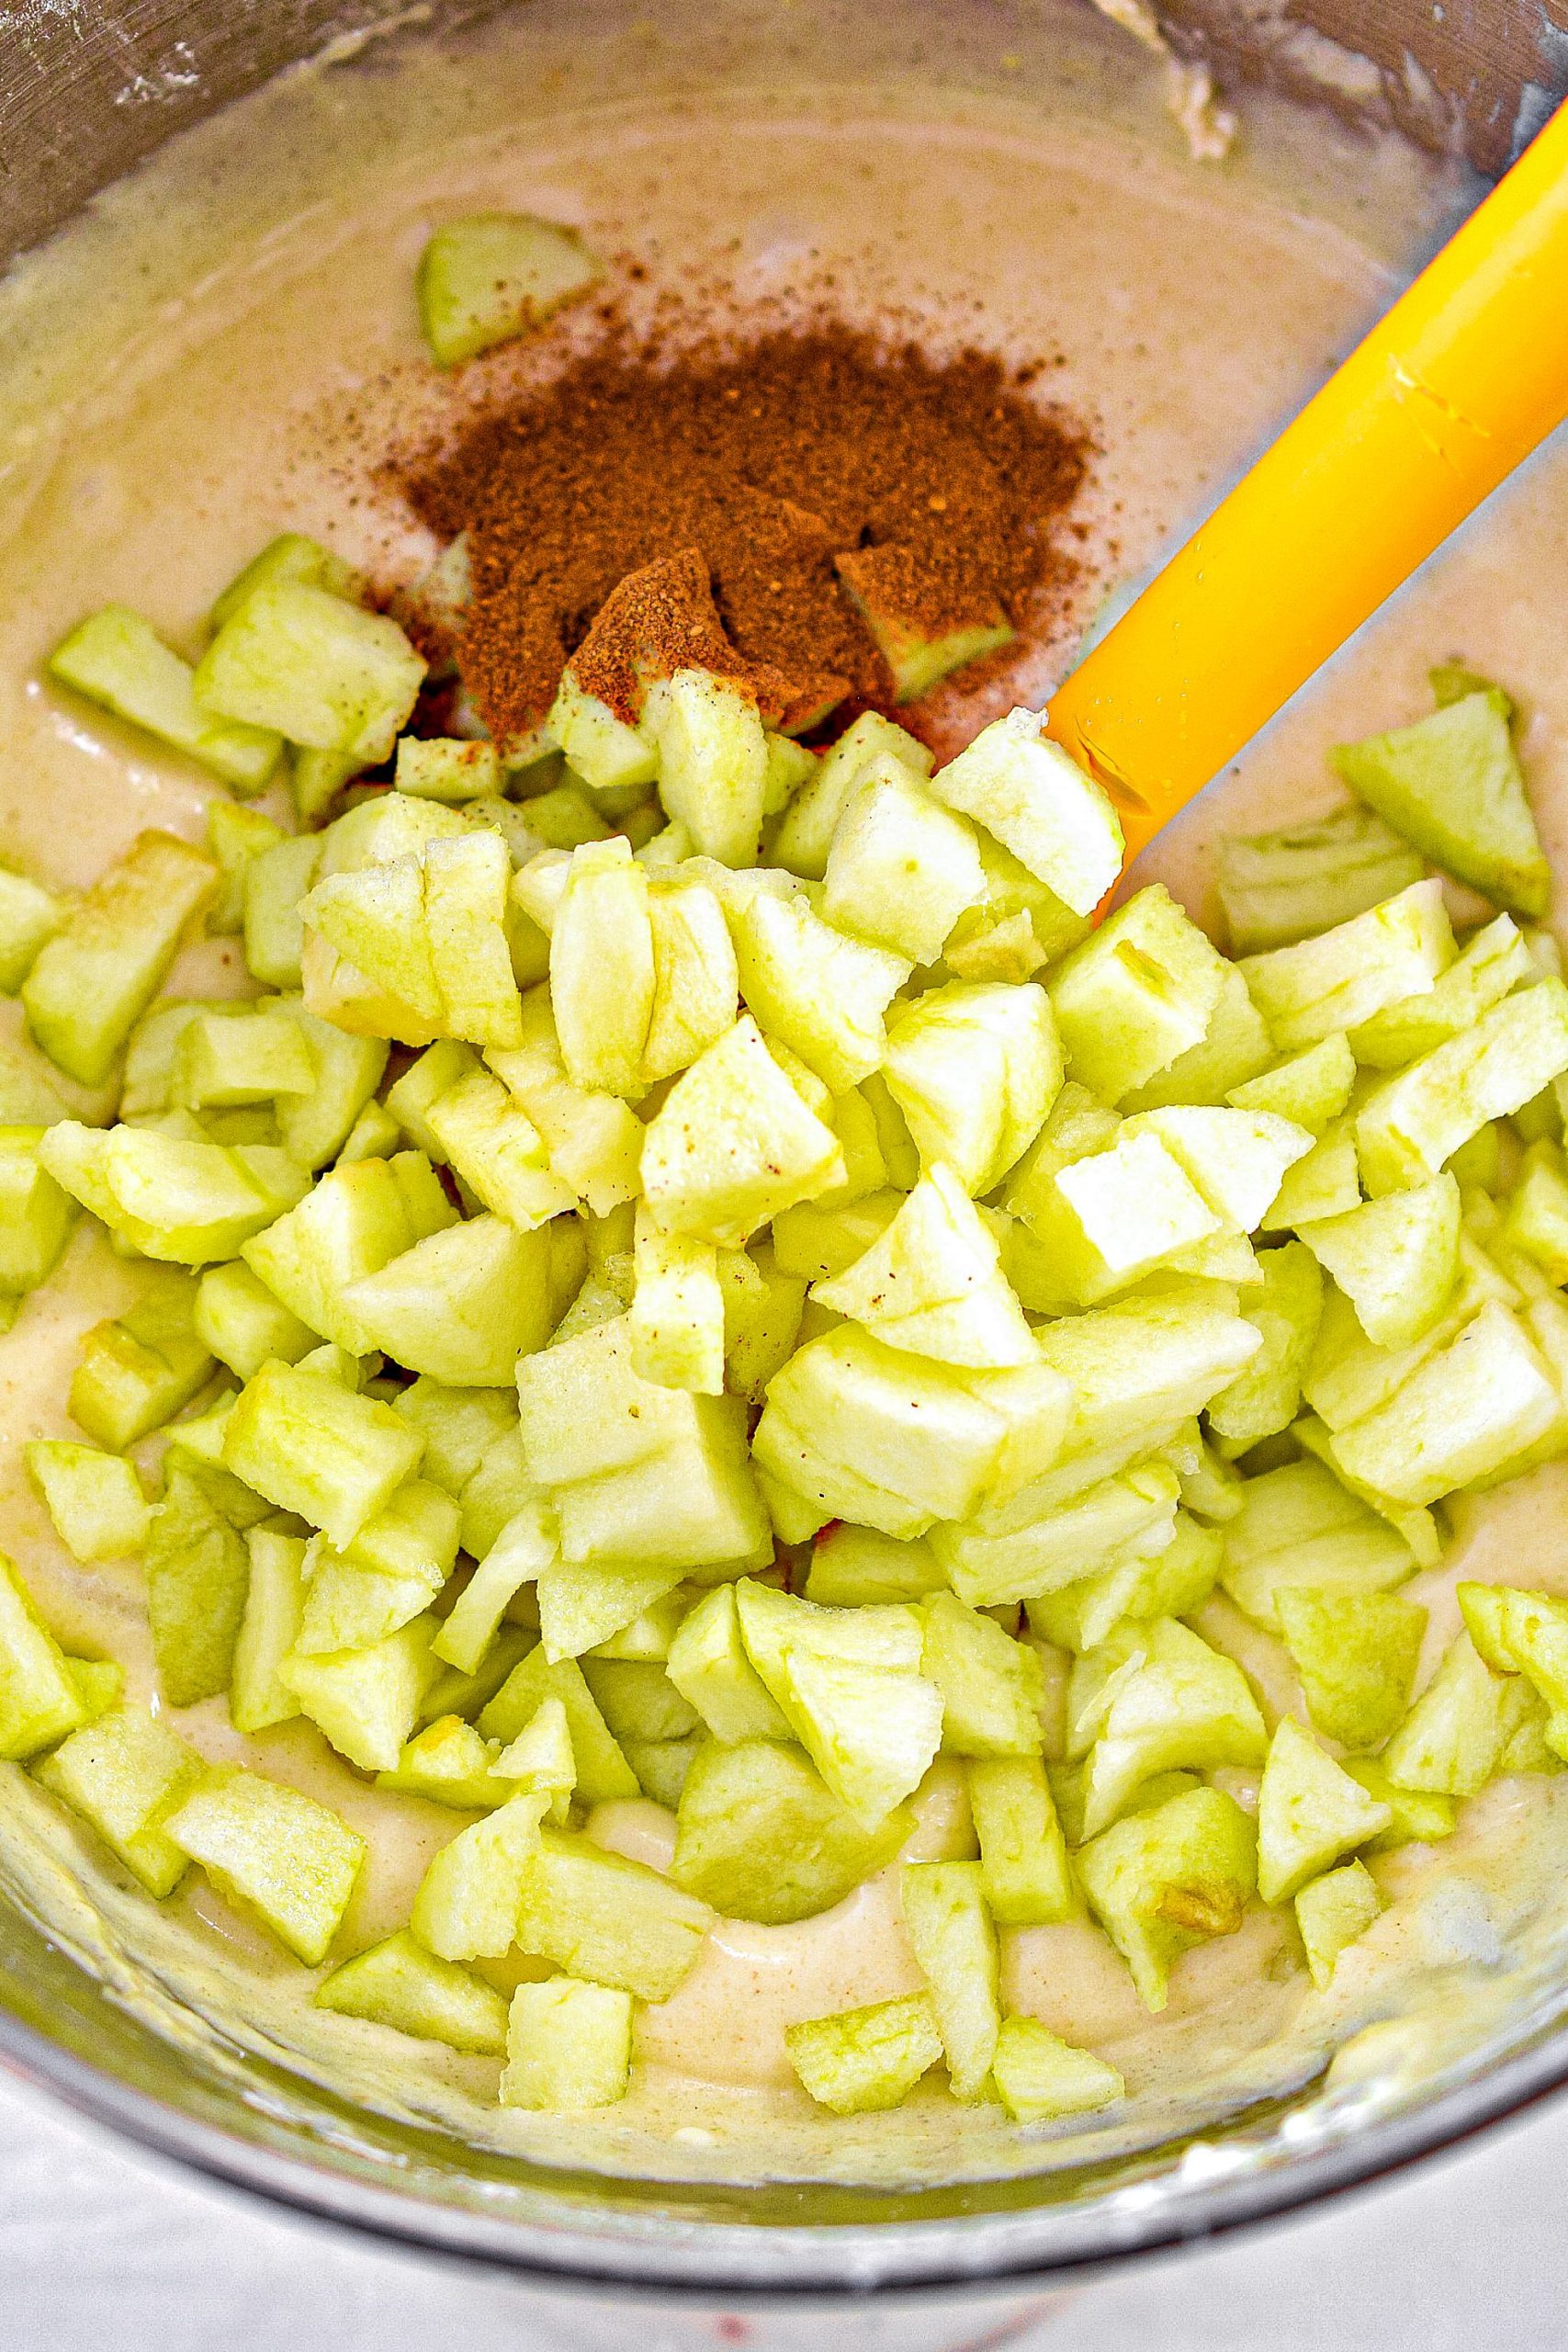 Fold in the apples and apple pie spice until well incorporated.